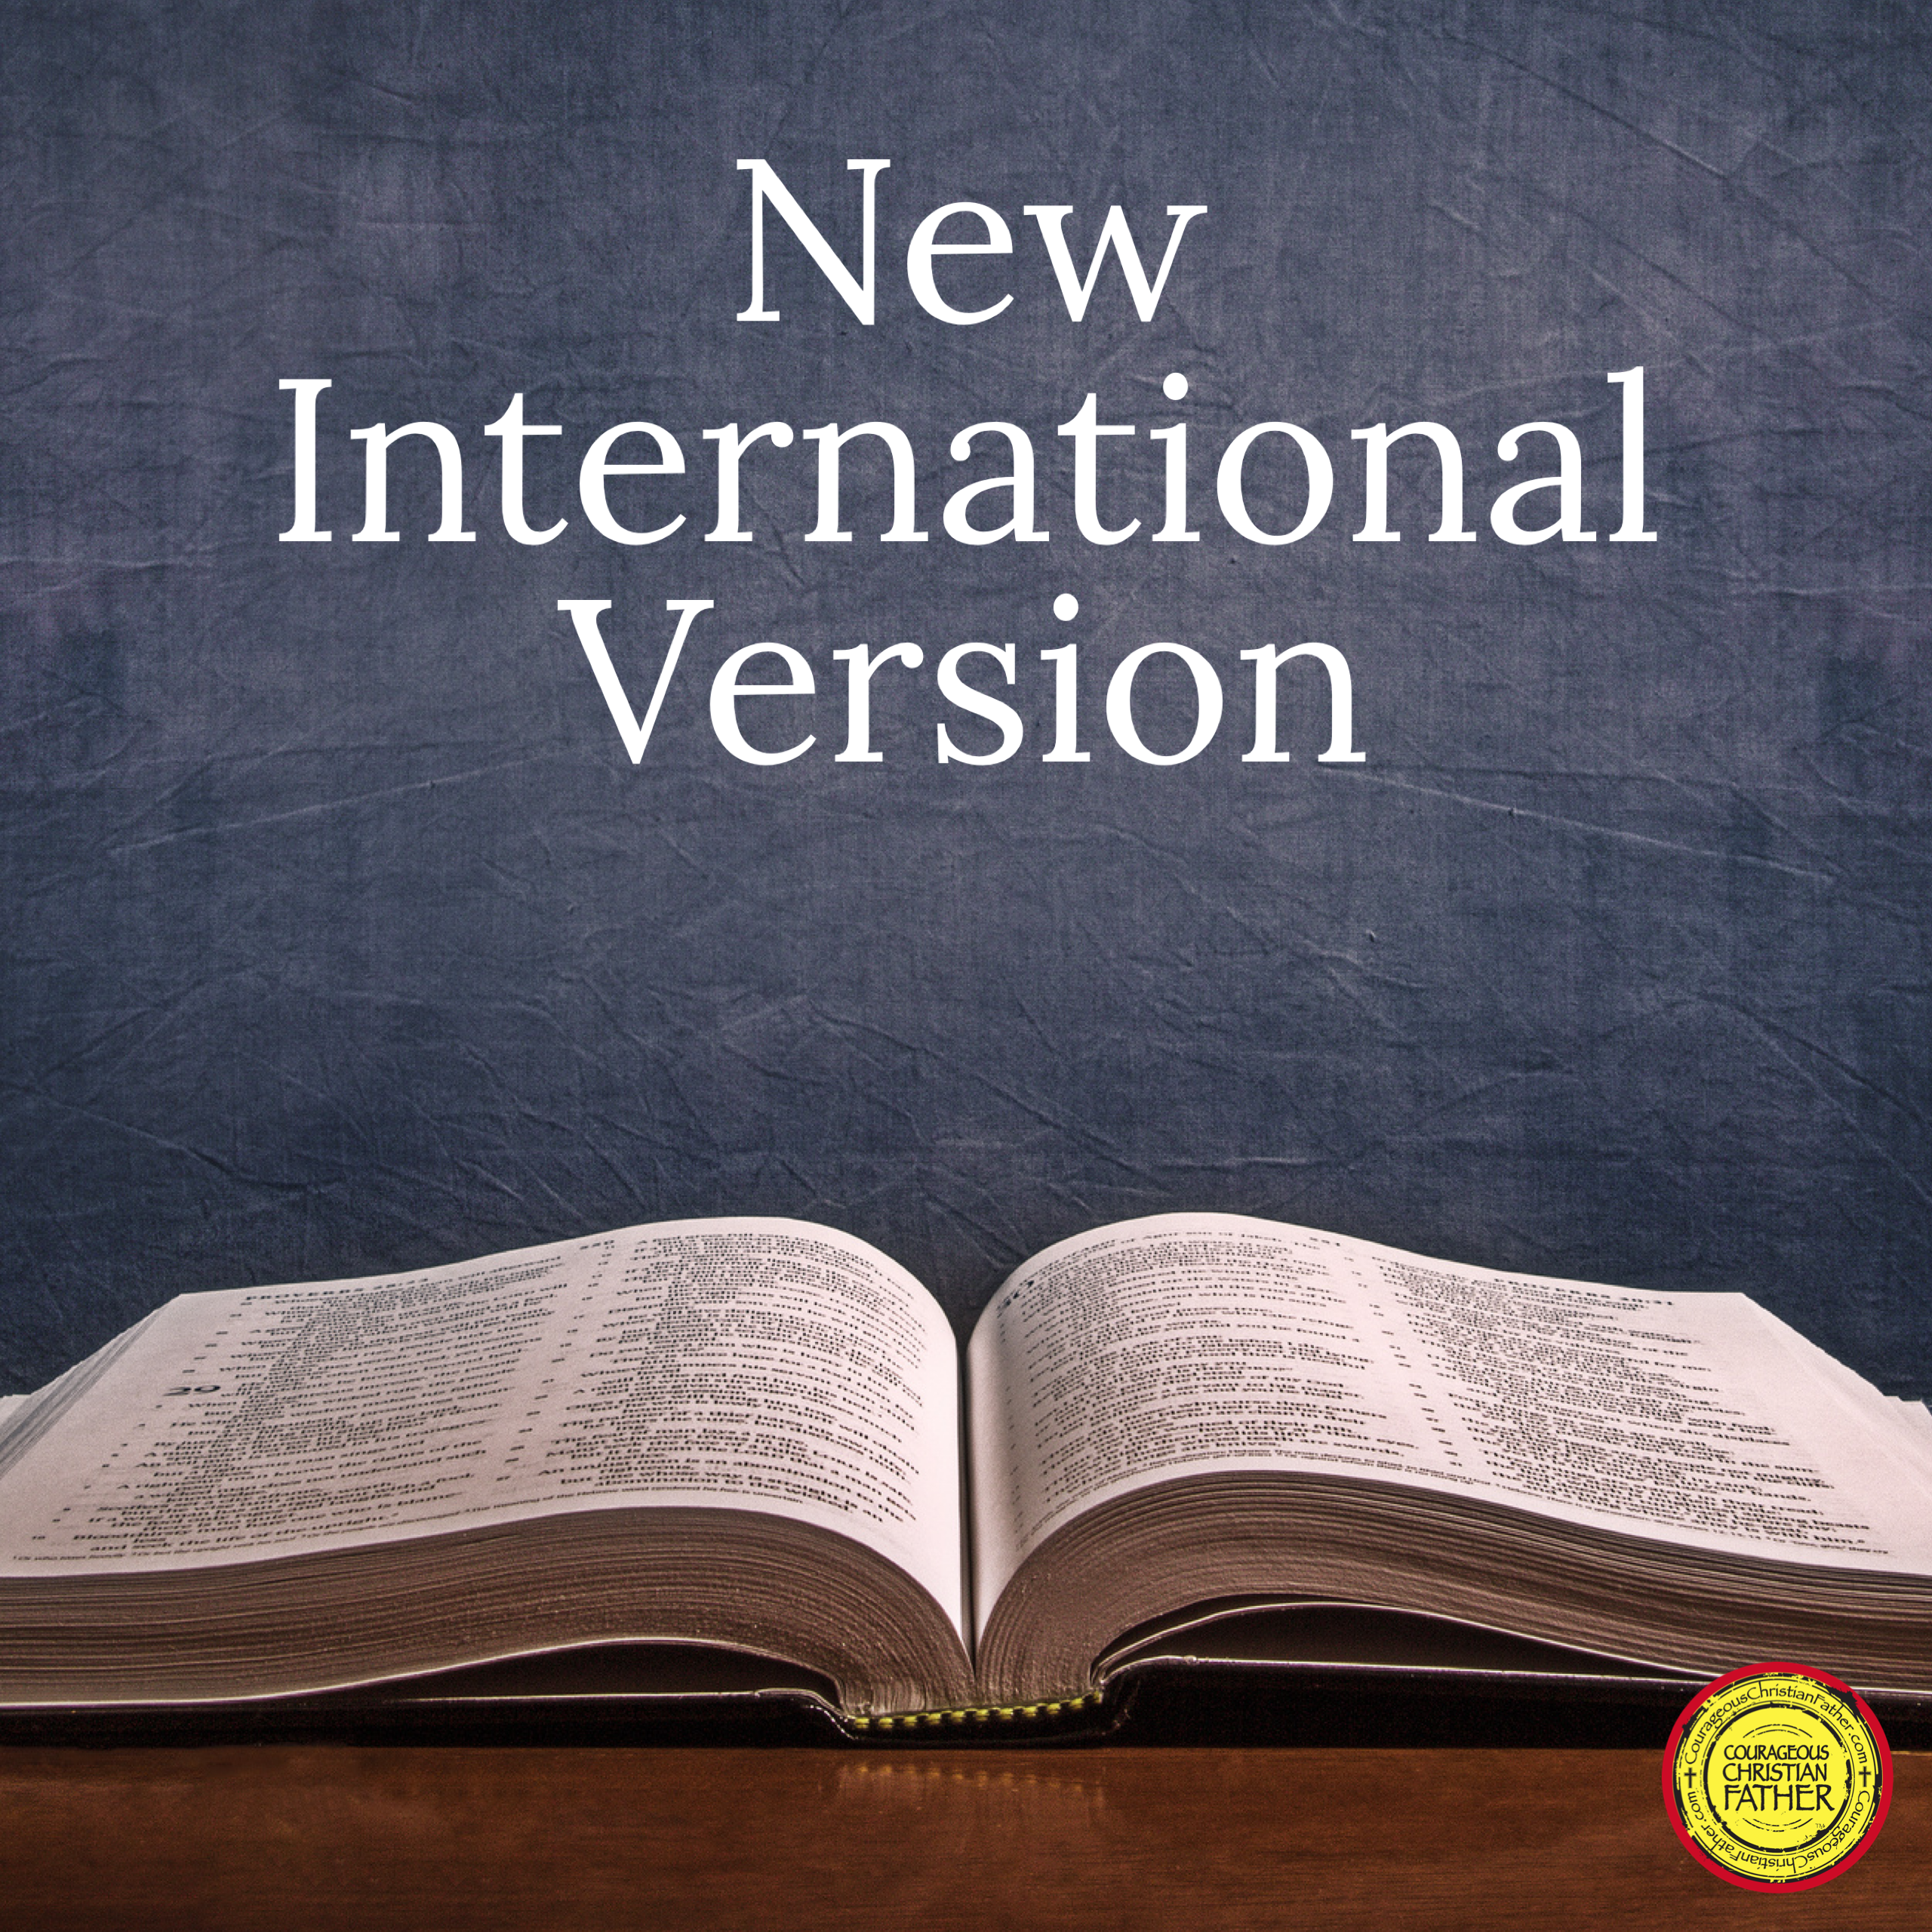 The New International Version (NIV) of the Bible is one of the most popular and widely used translations of the Christian scriptures. The NIV was first published in 1978 by the International Bible Society (IBS) and has since undergone several revisions and updates. #NIV